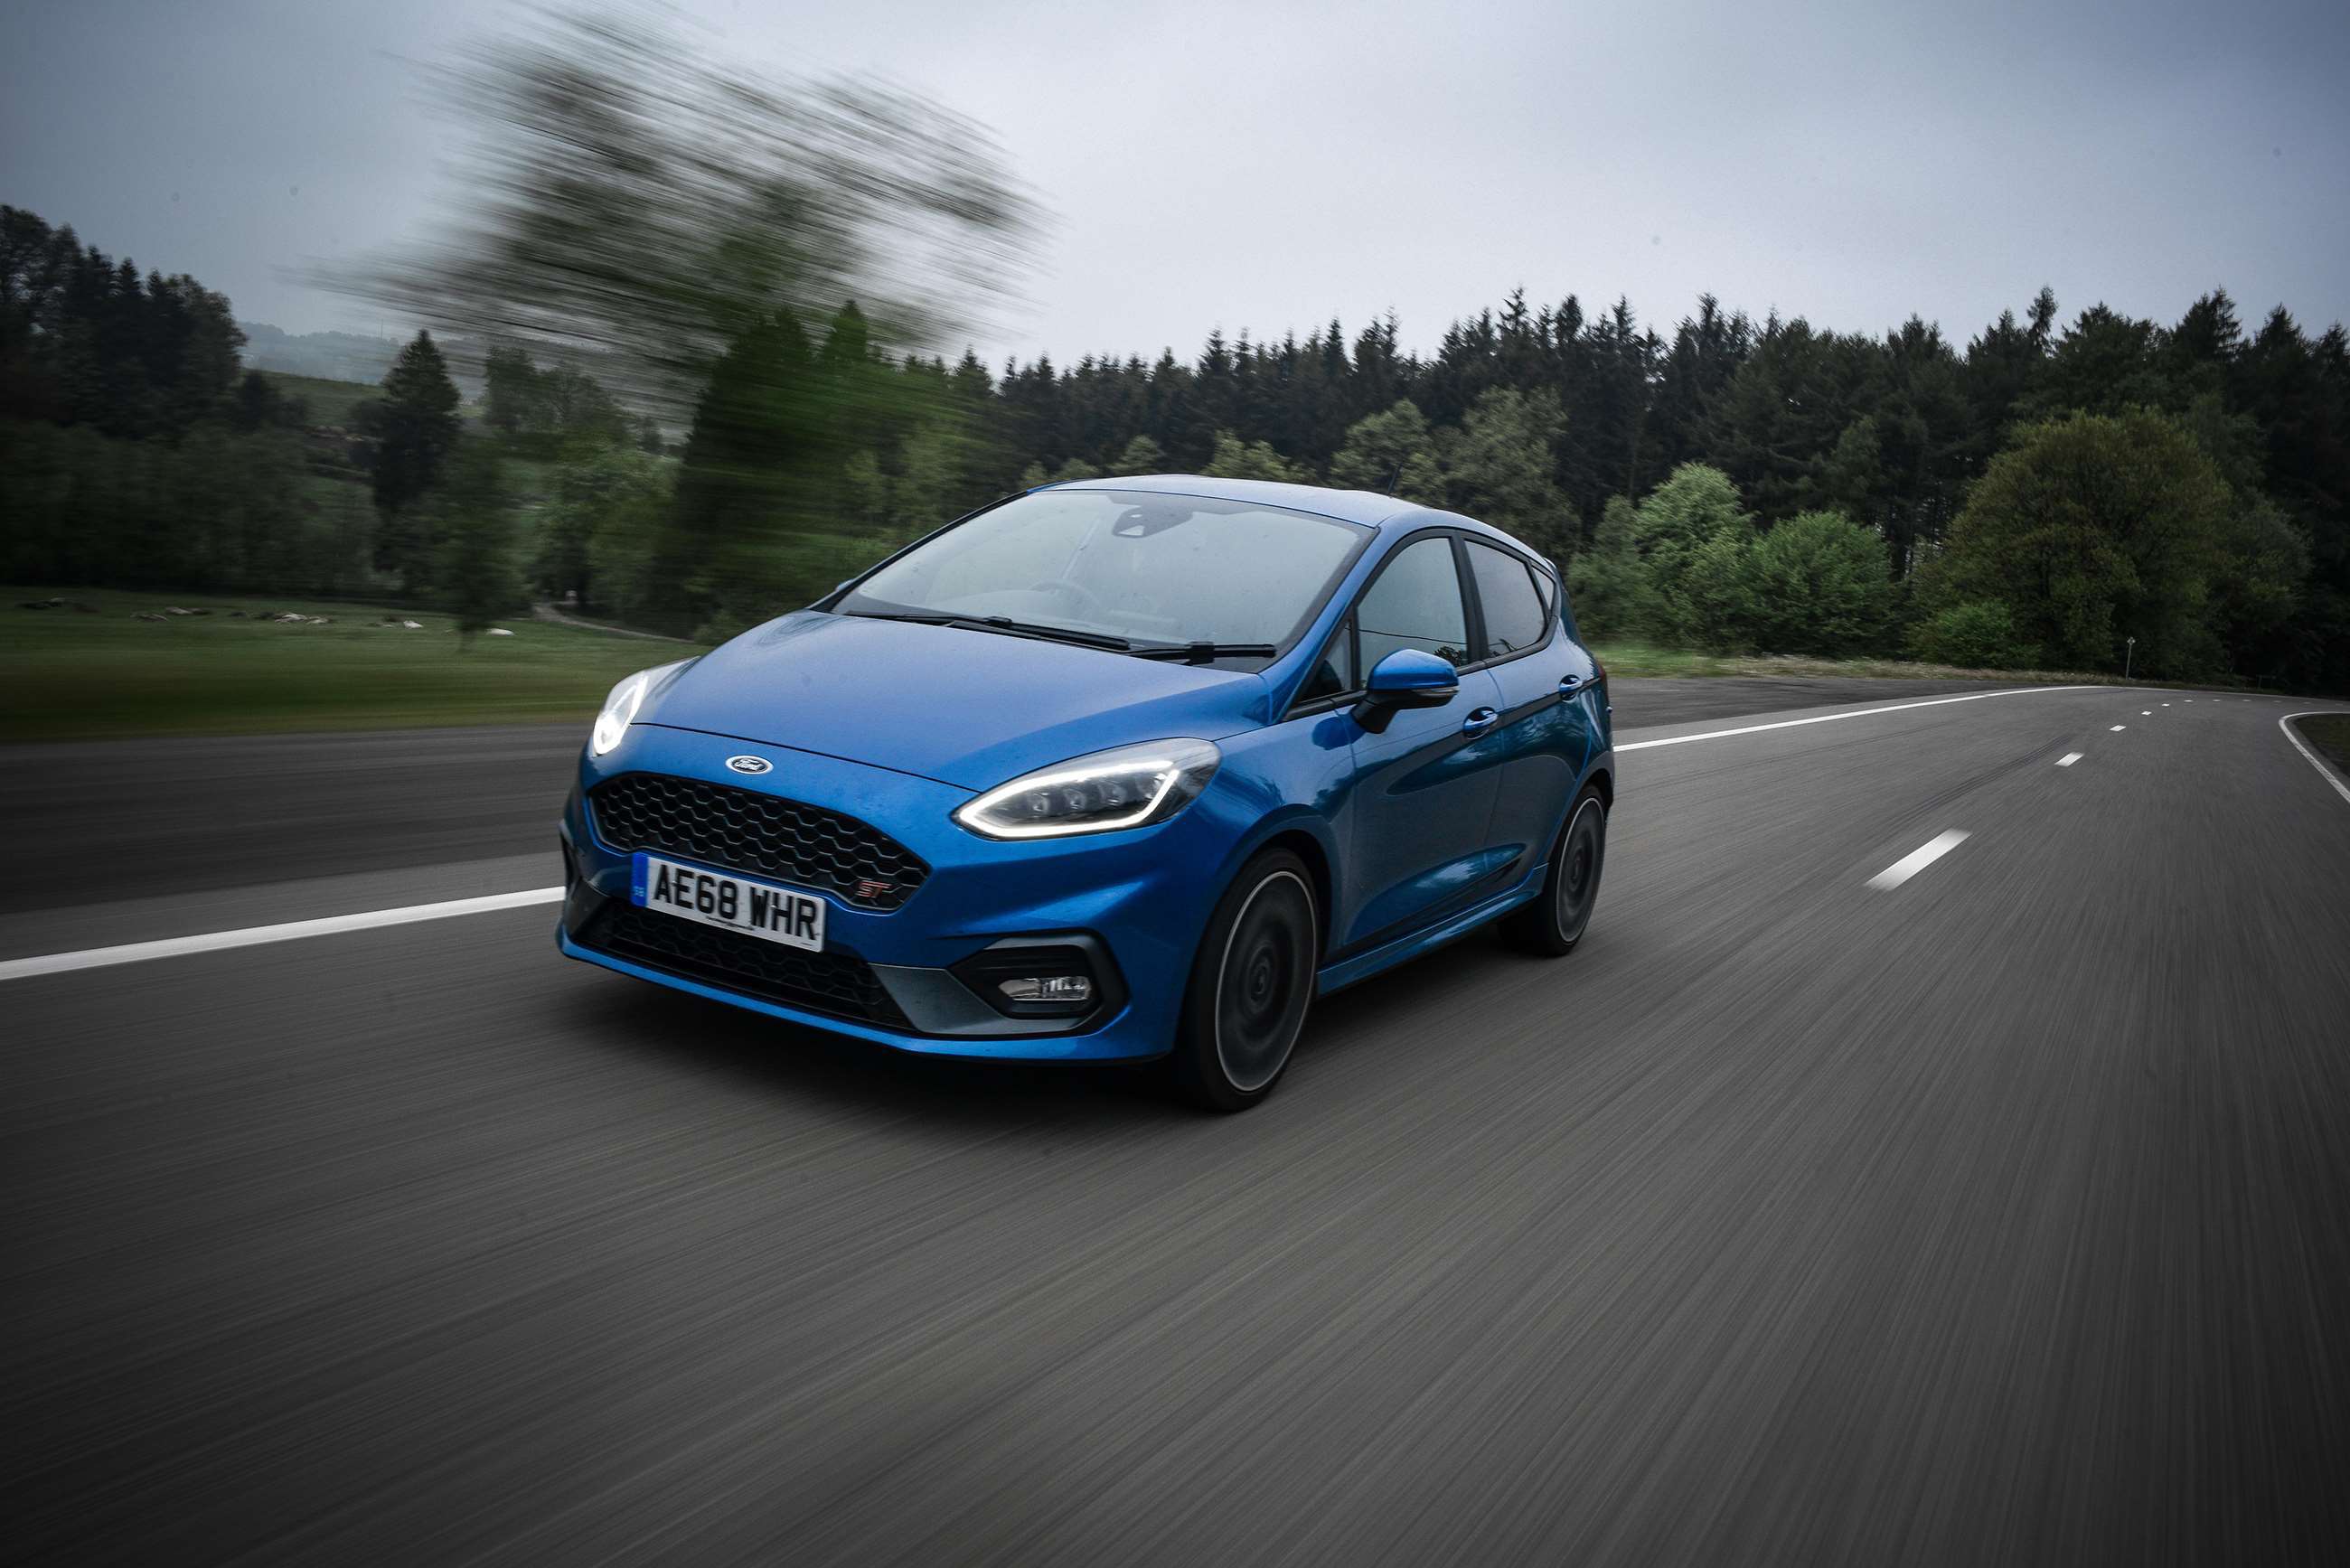 ford-fiesta-st-spa-francorchamps-masta-kink-pete-summers-goodwood-06062019.jpg